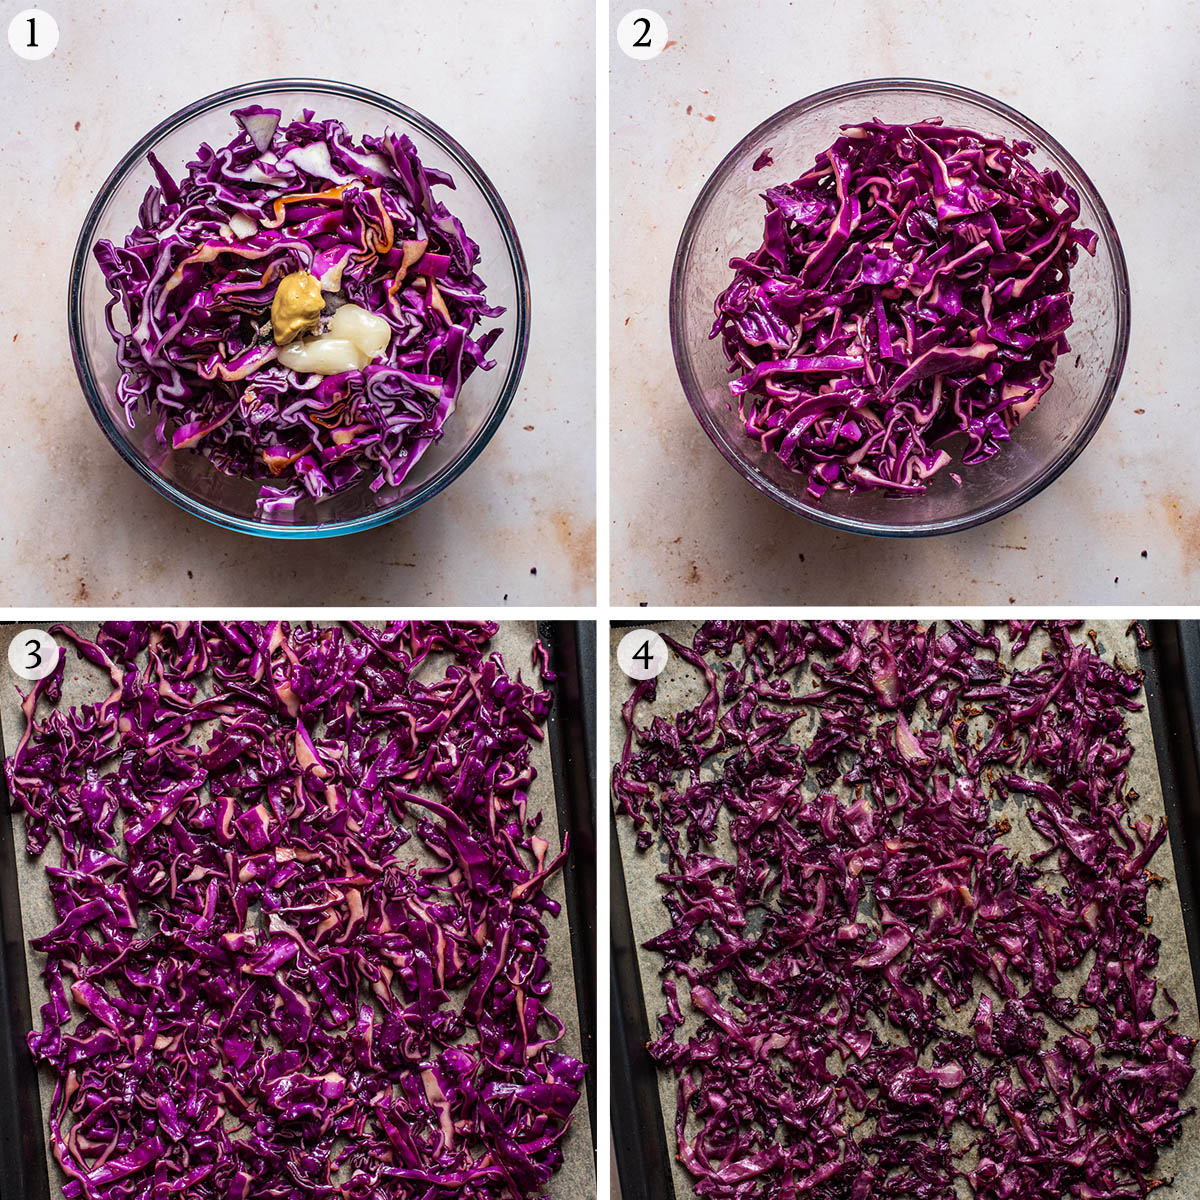 Roasted cabbage steps 1 to 4.